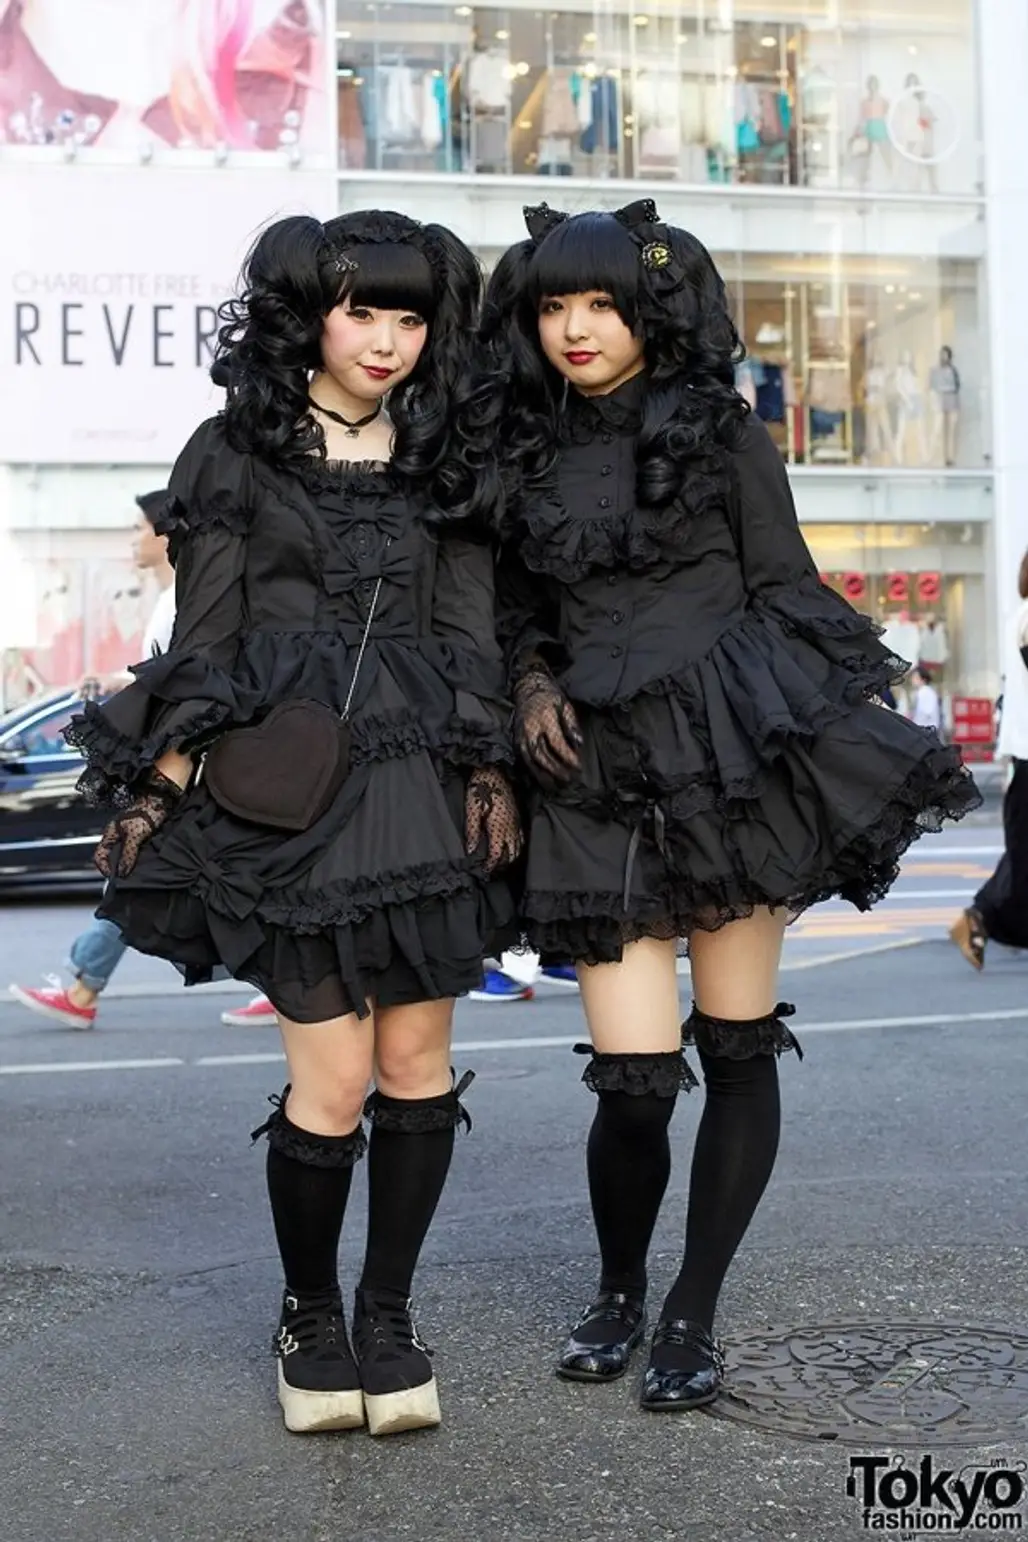 What Are the Different Types of Japanese Fashion?